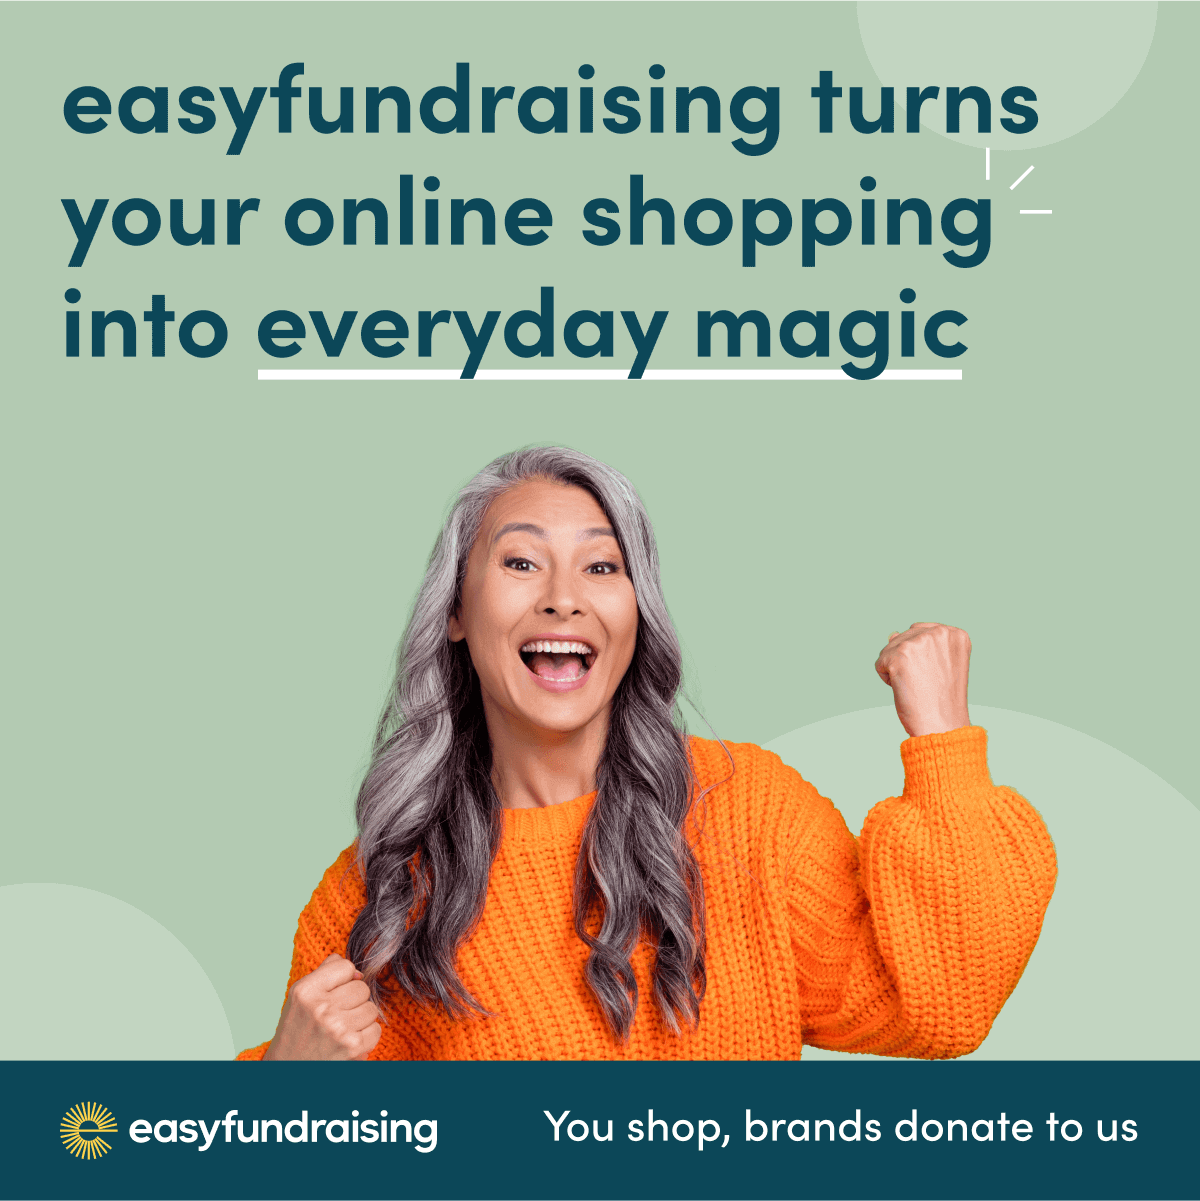 Sign up to easyfundraising today and help raise funds for CSRC!